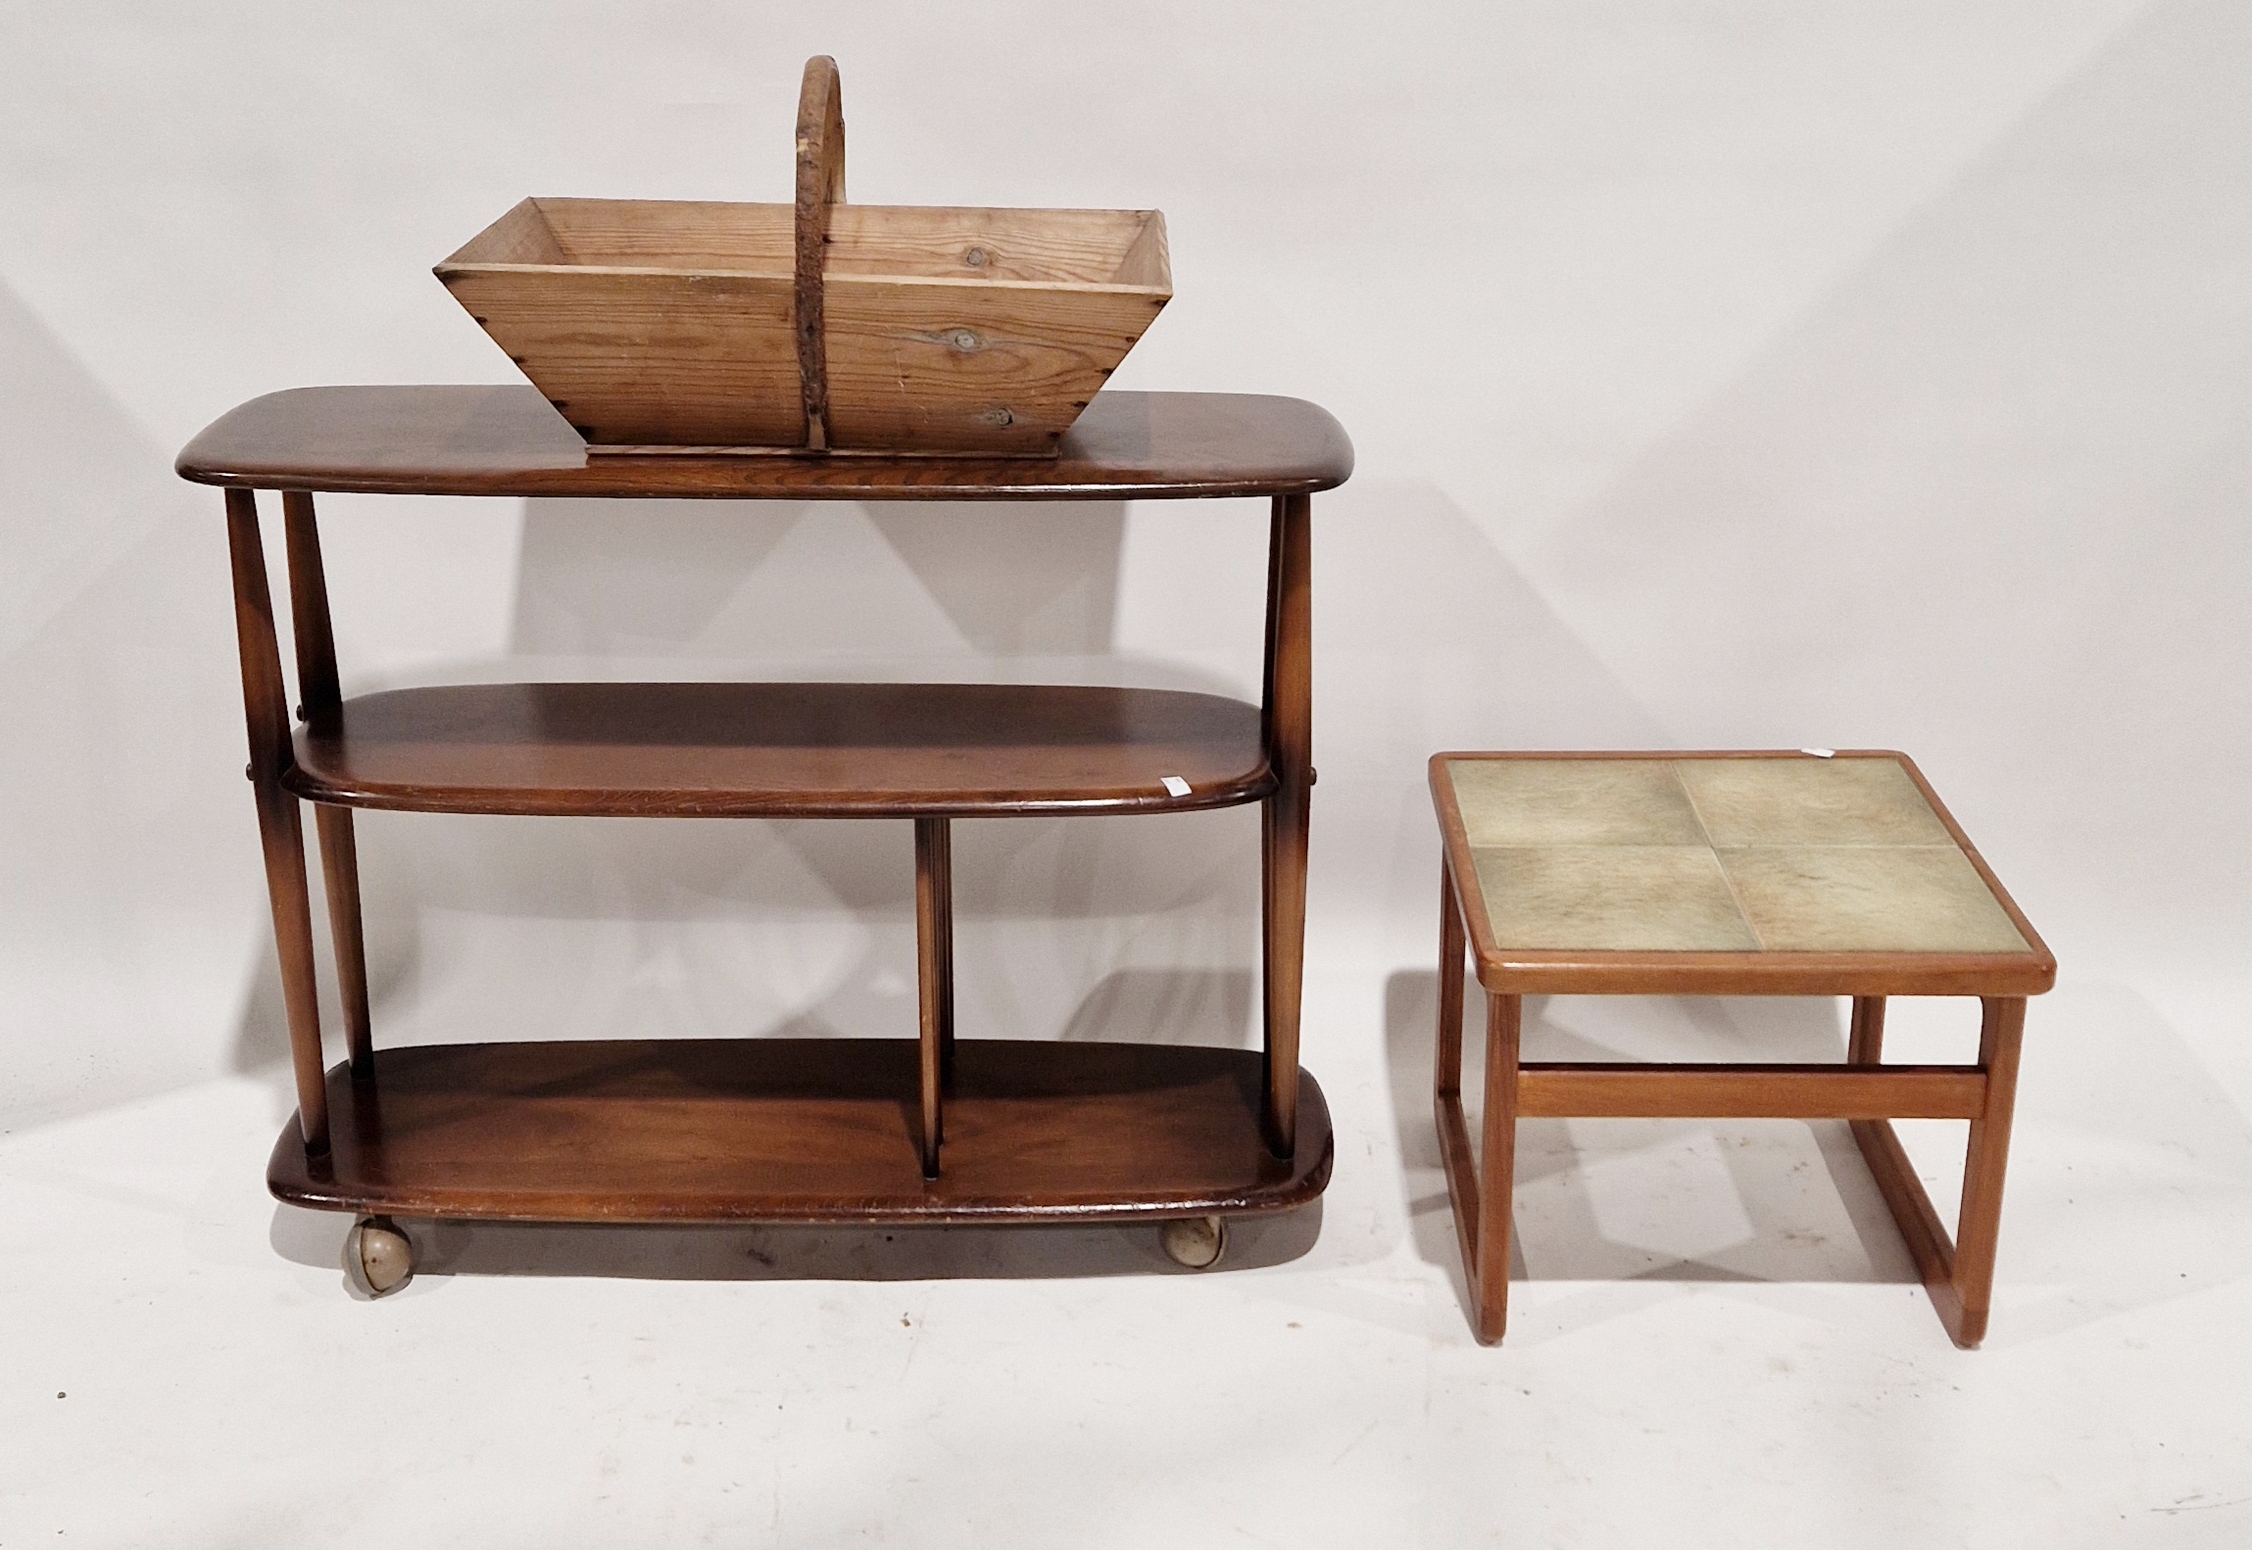 20th century Ercol three-tier occasional table on castors, 91cm wide, a tile-top coffee table and